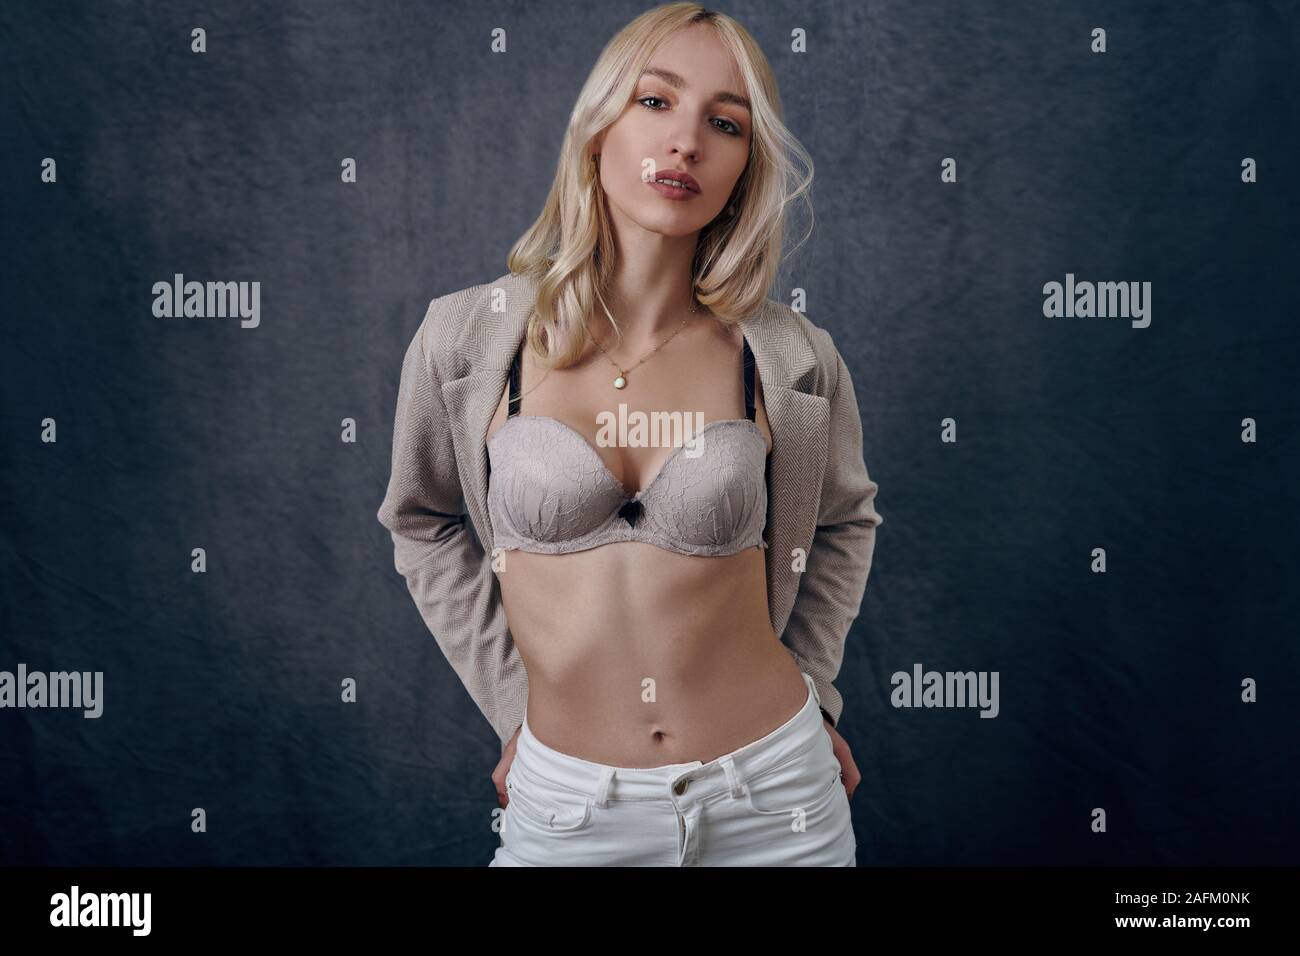 Attractive young blond woman with opened blazer showing her new bra and giving the camera a sultry look over a grey studio background Stock Photo